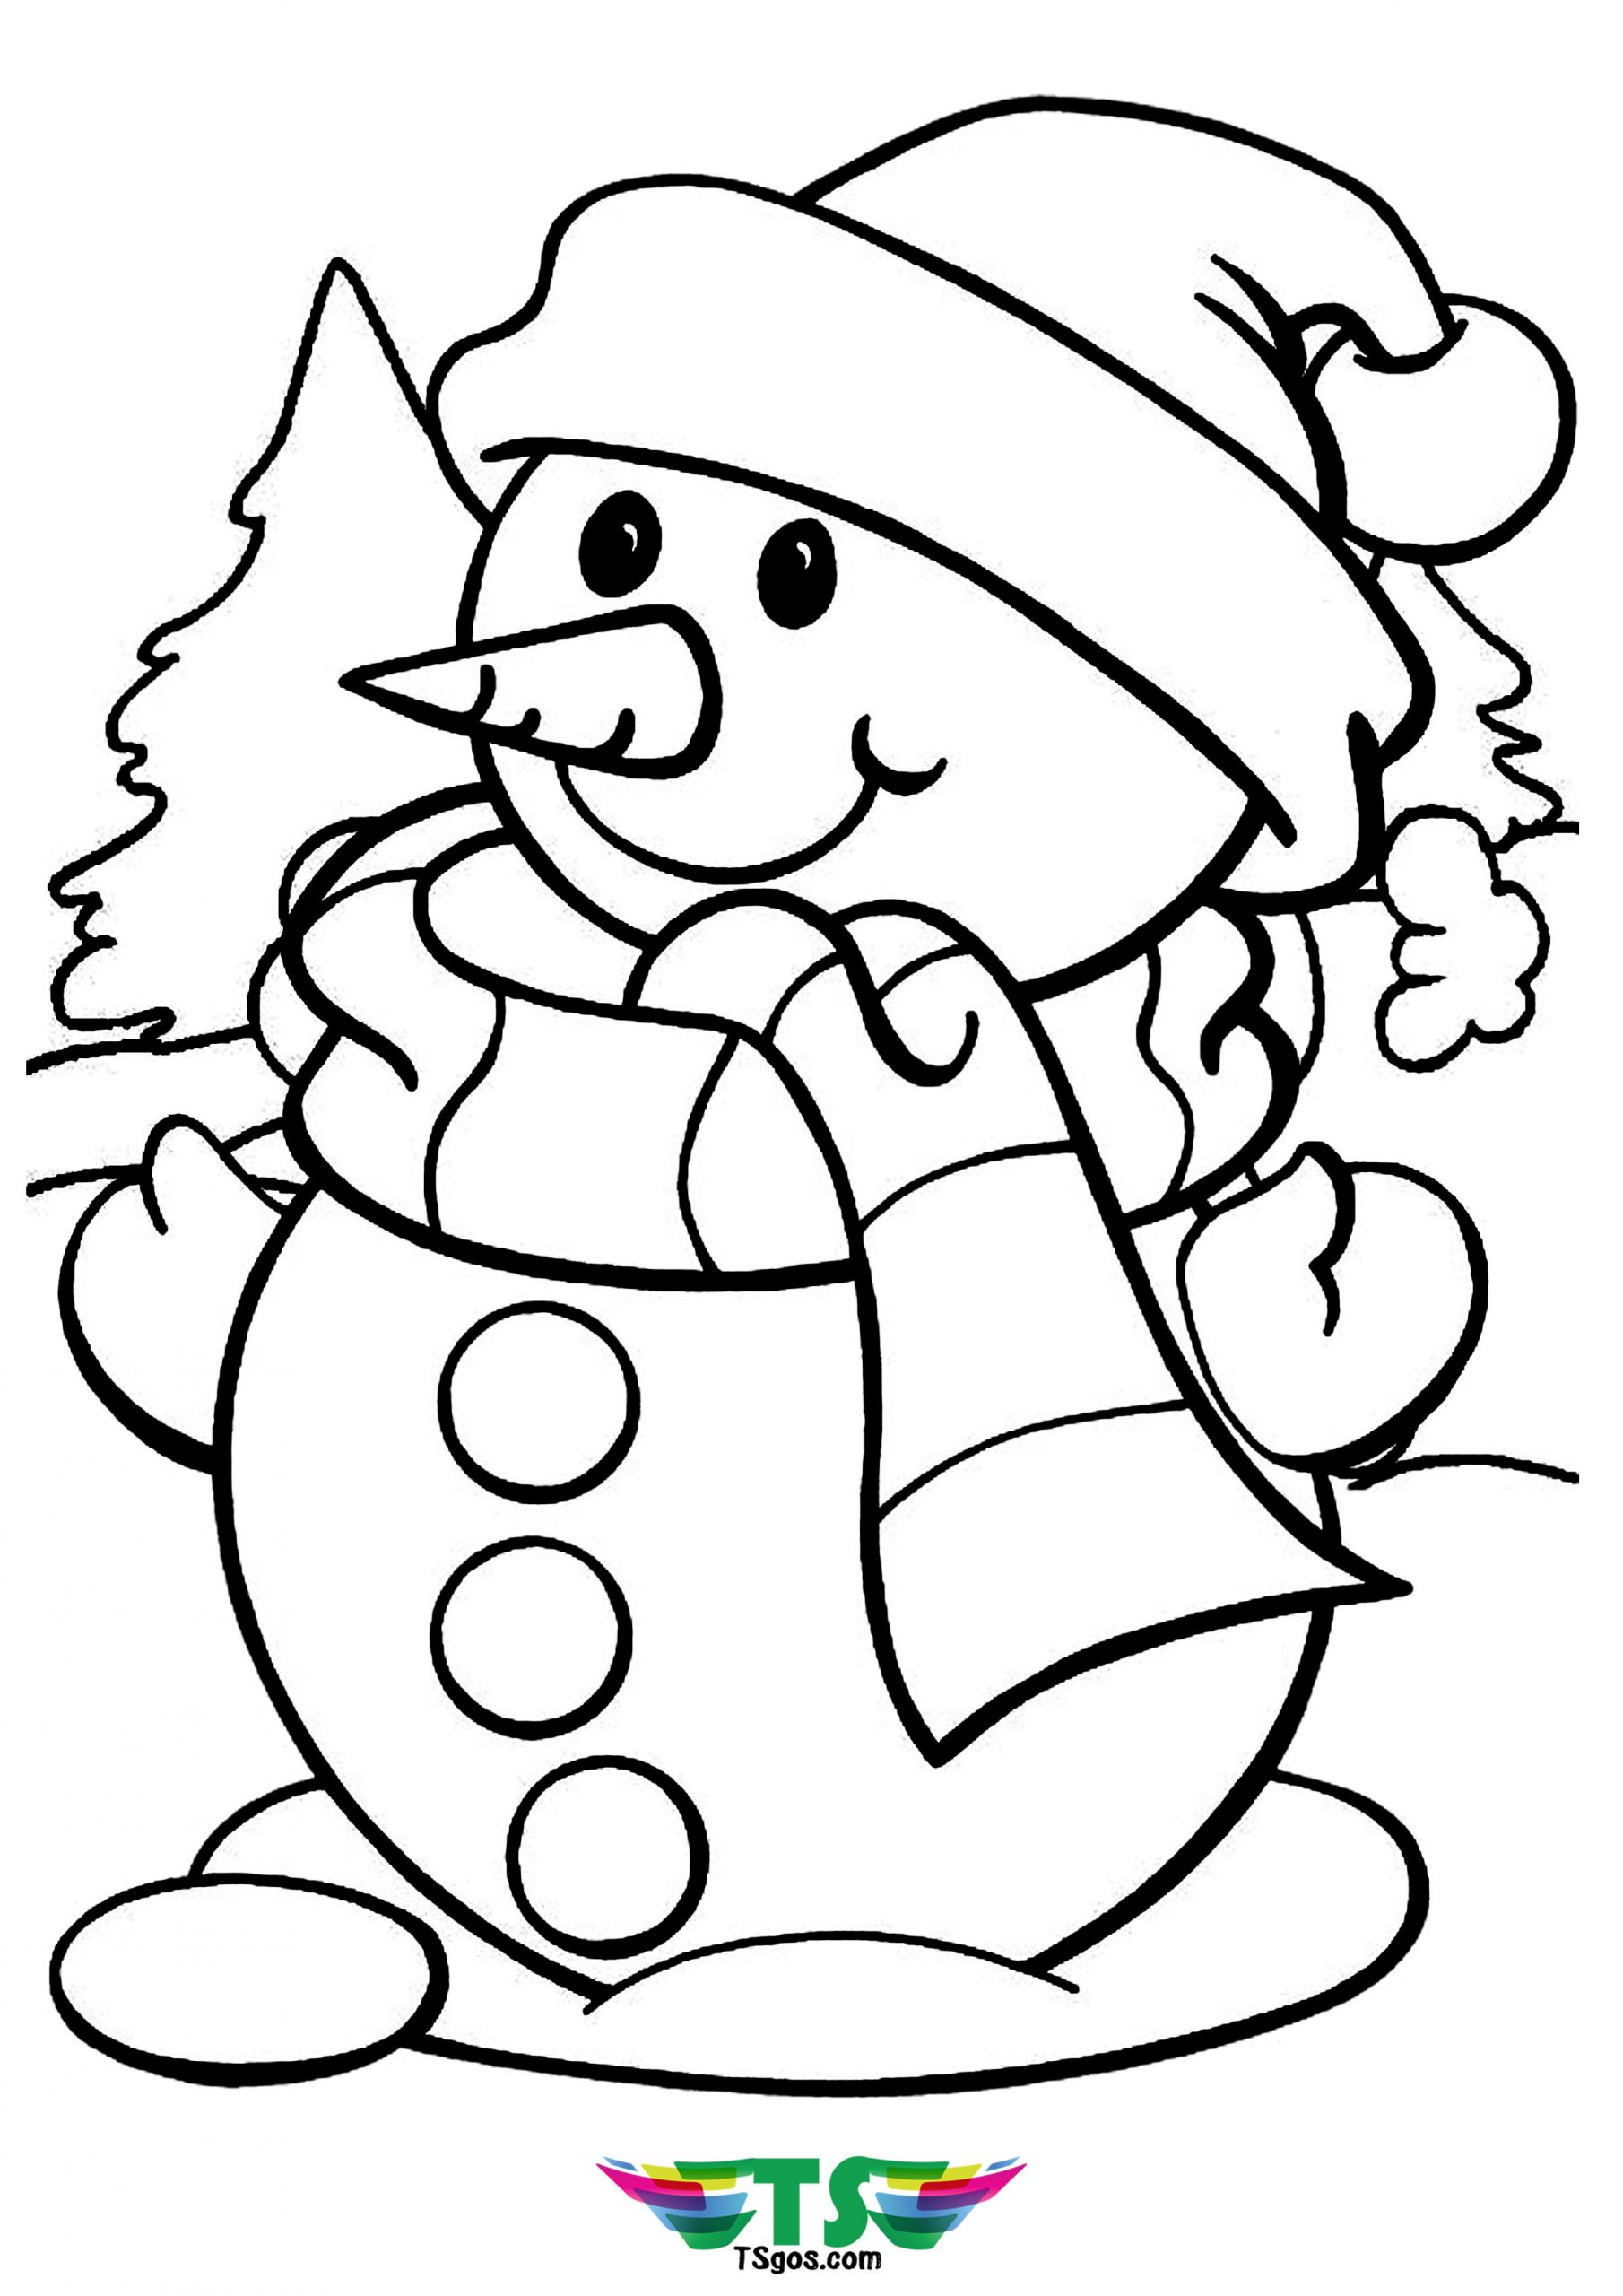 Winter Coloring Page For Kids